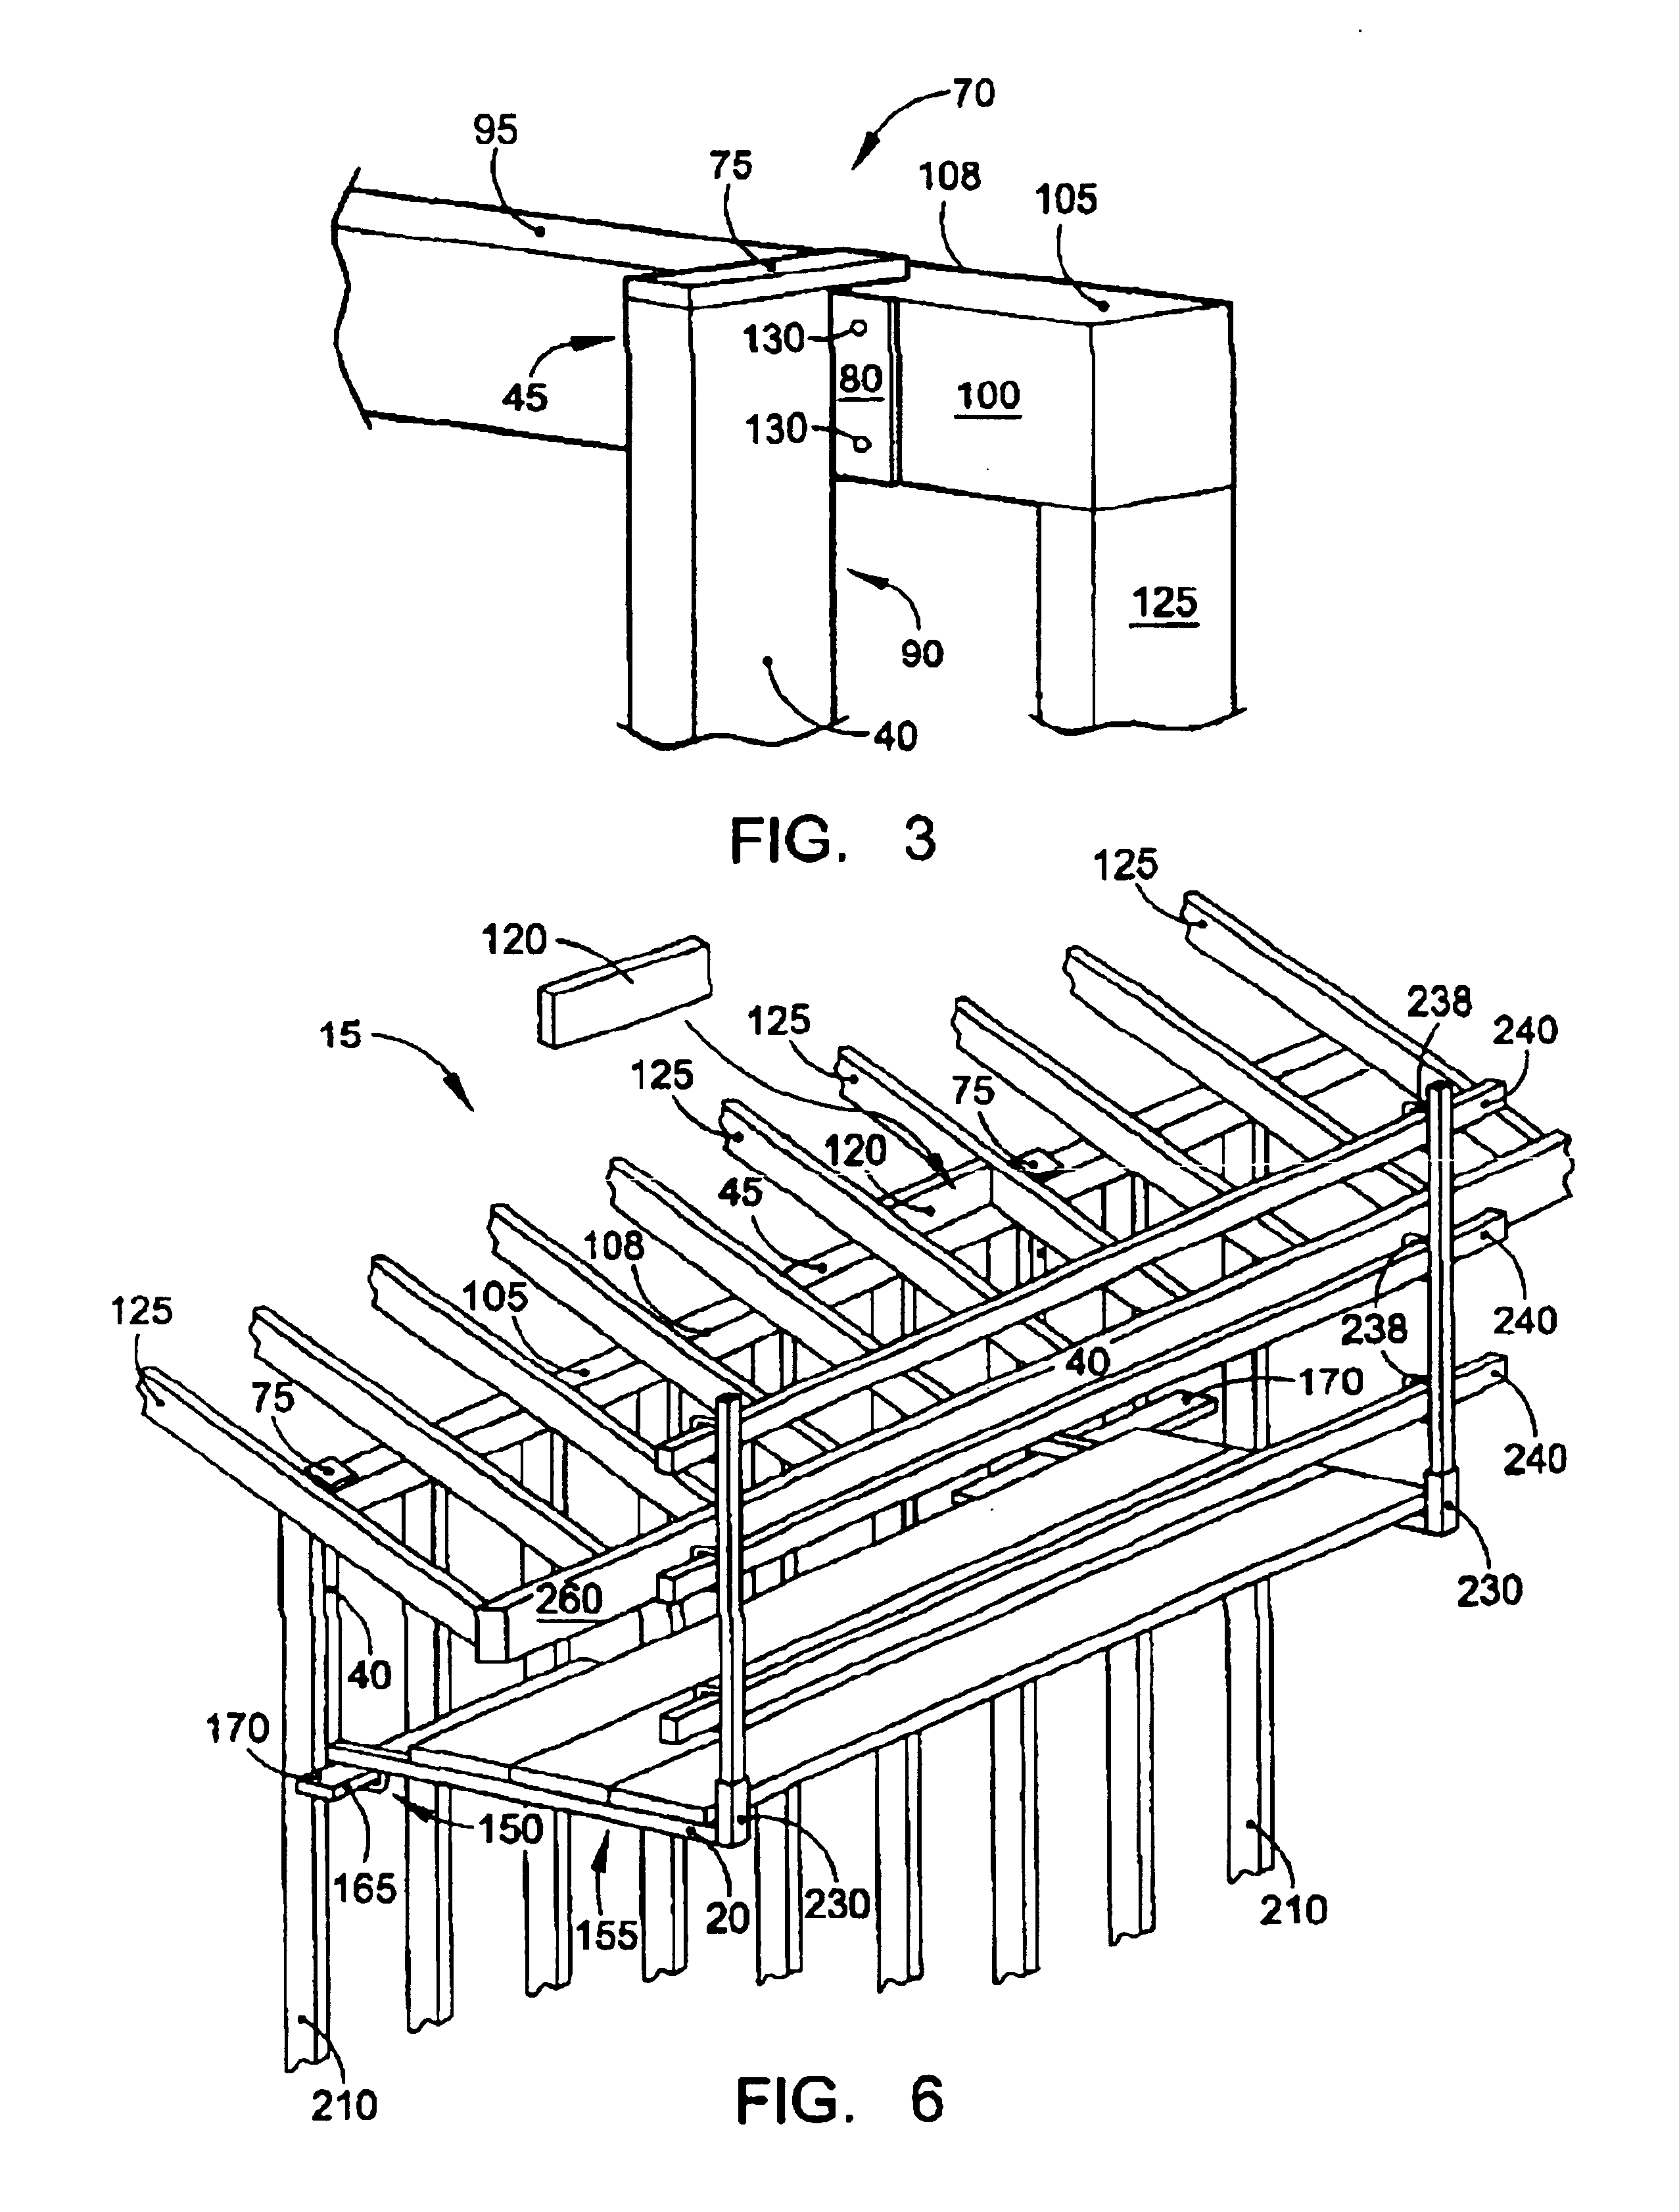 Suspended scaffolding system